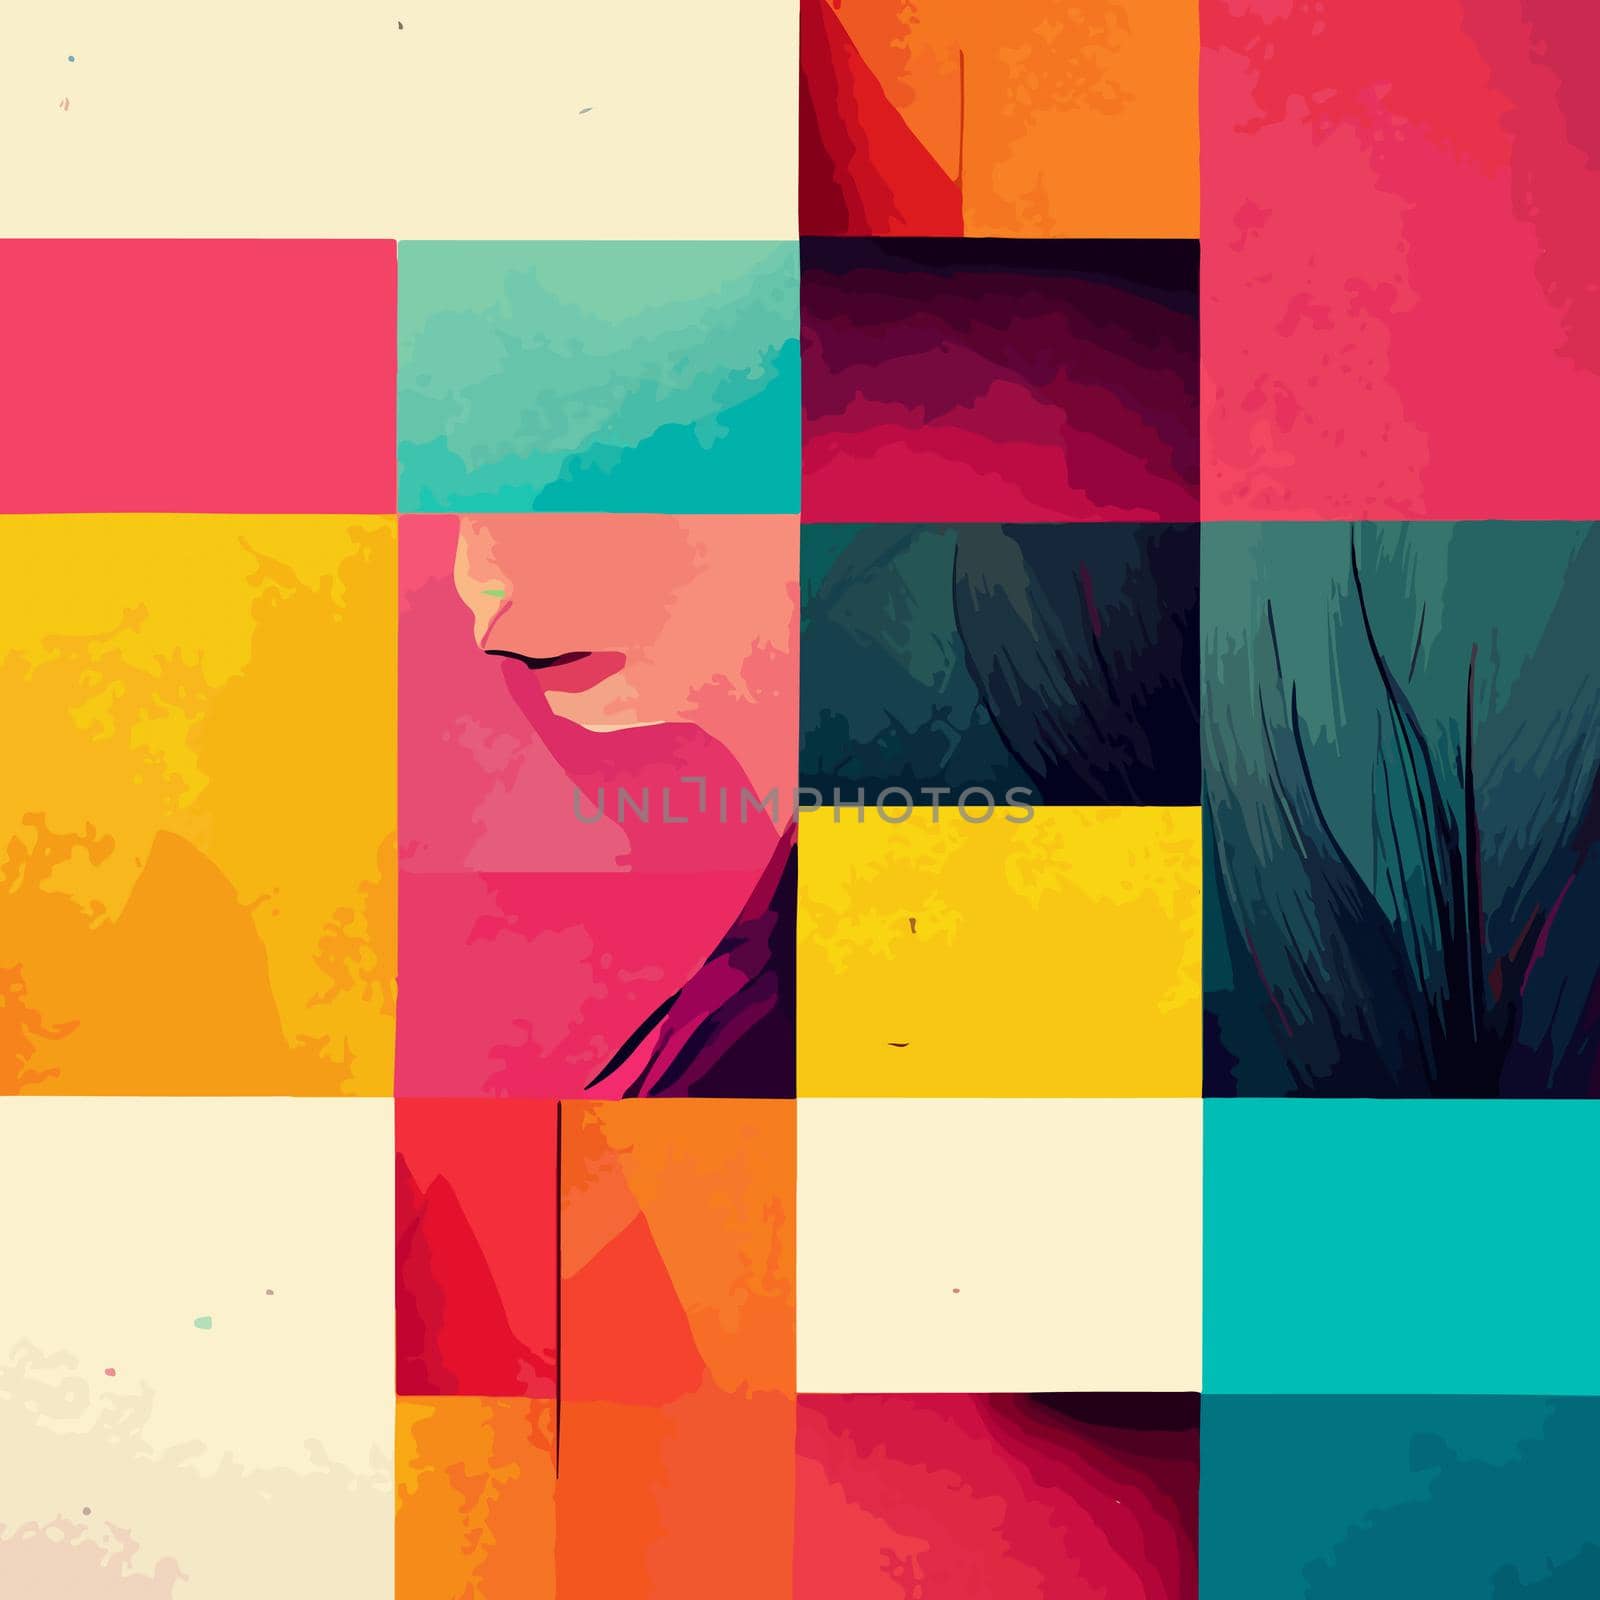 abstract geometric background. colorful geometric illustration. by JpRamos